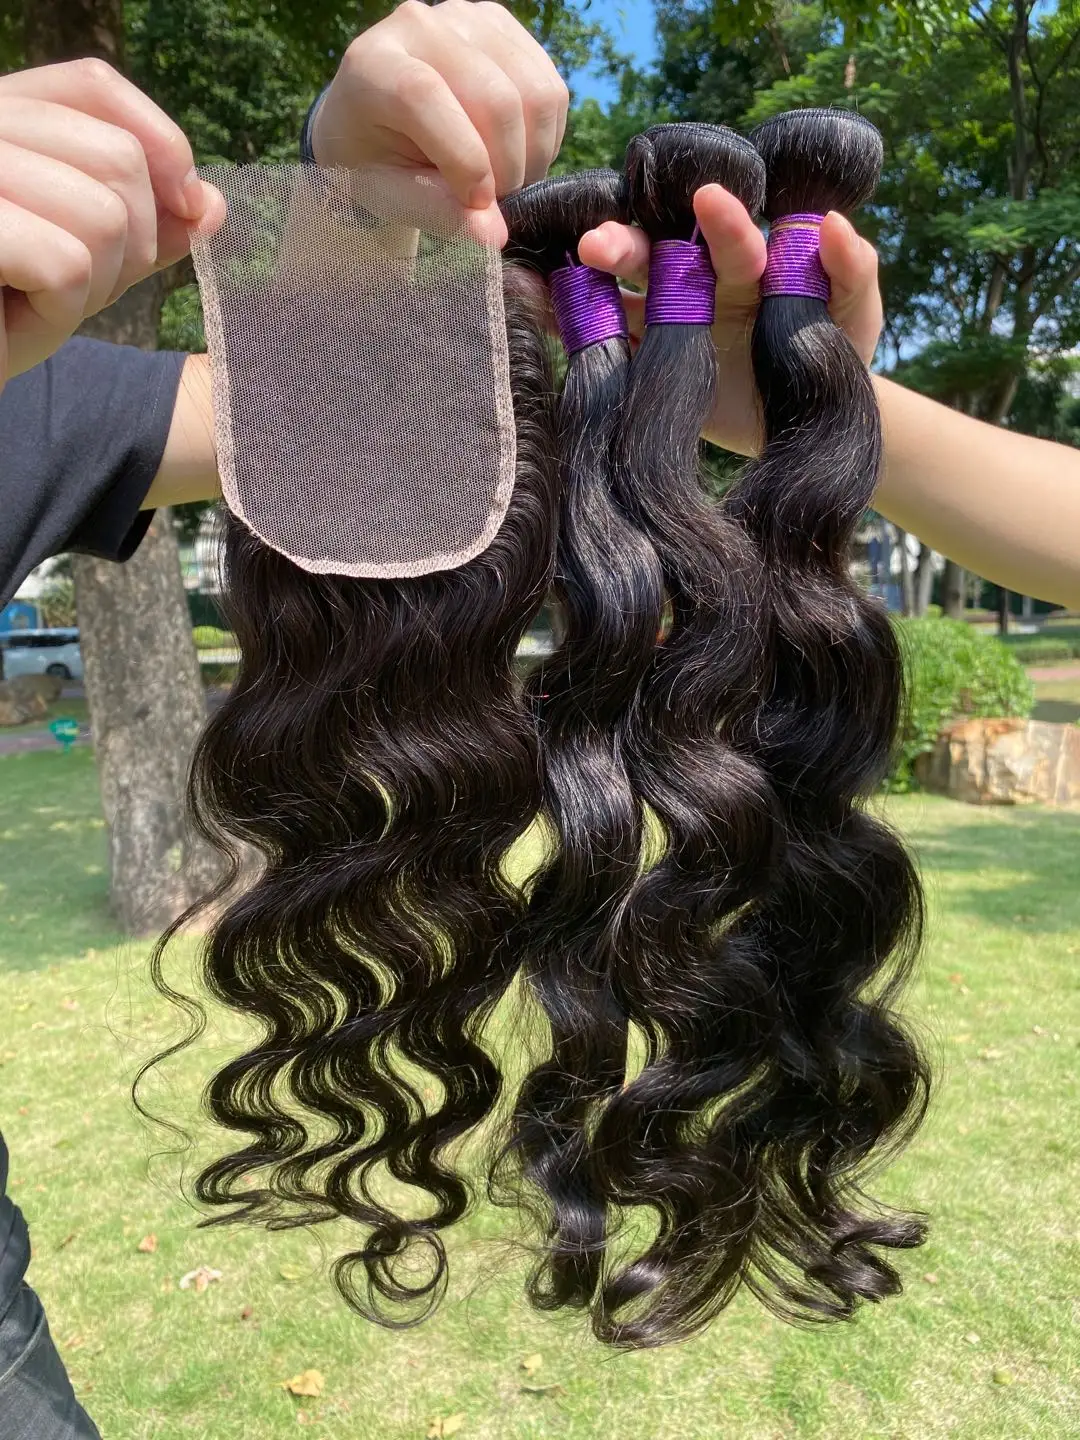 Curly Hair Brazilian Body Wave Bundles With Closure Human Hair Bundles With Closure Brazilian Hair With Lace Closure Non-Remy